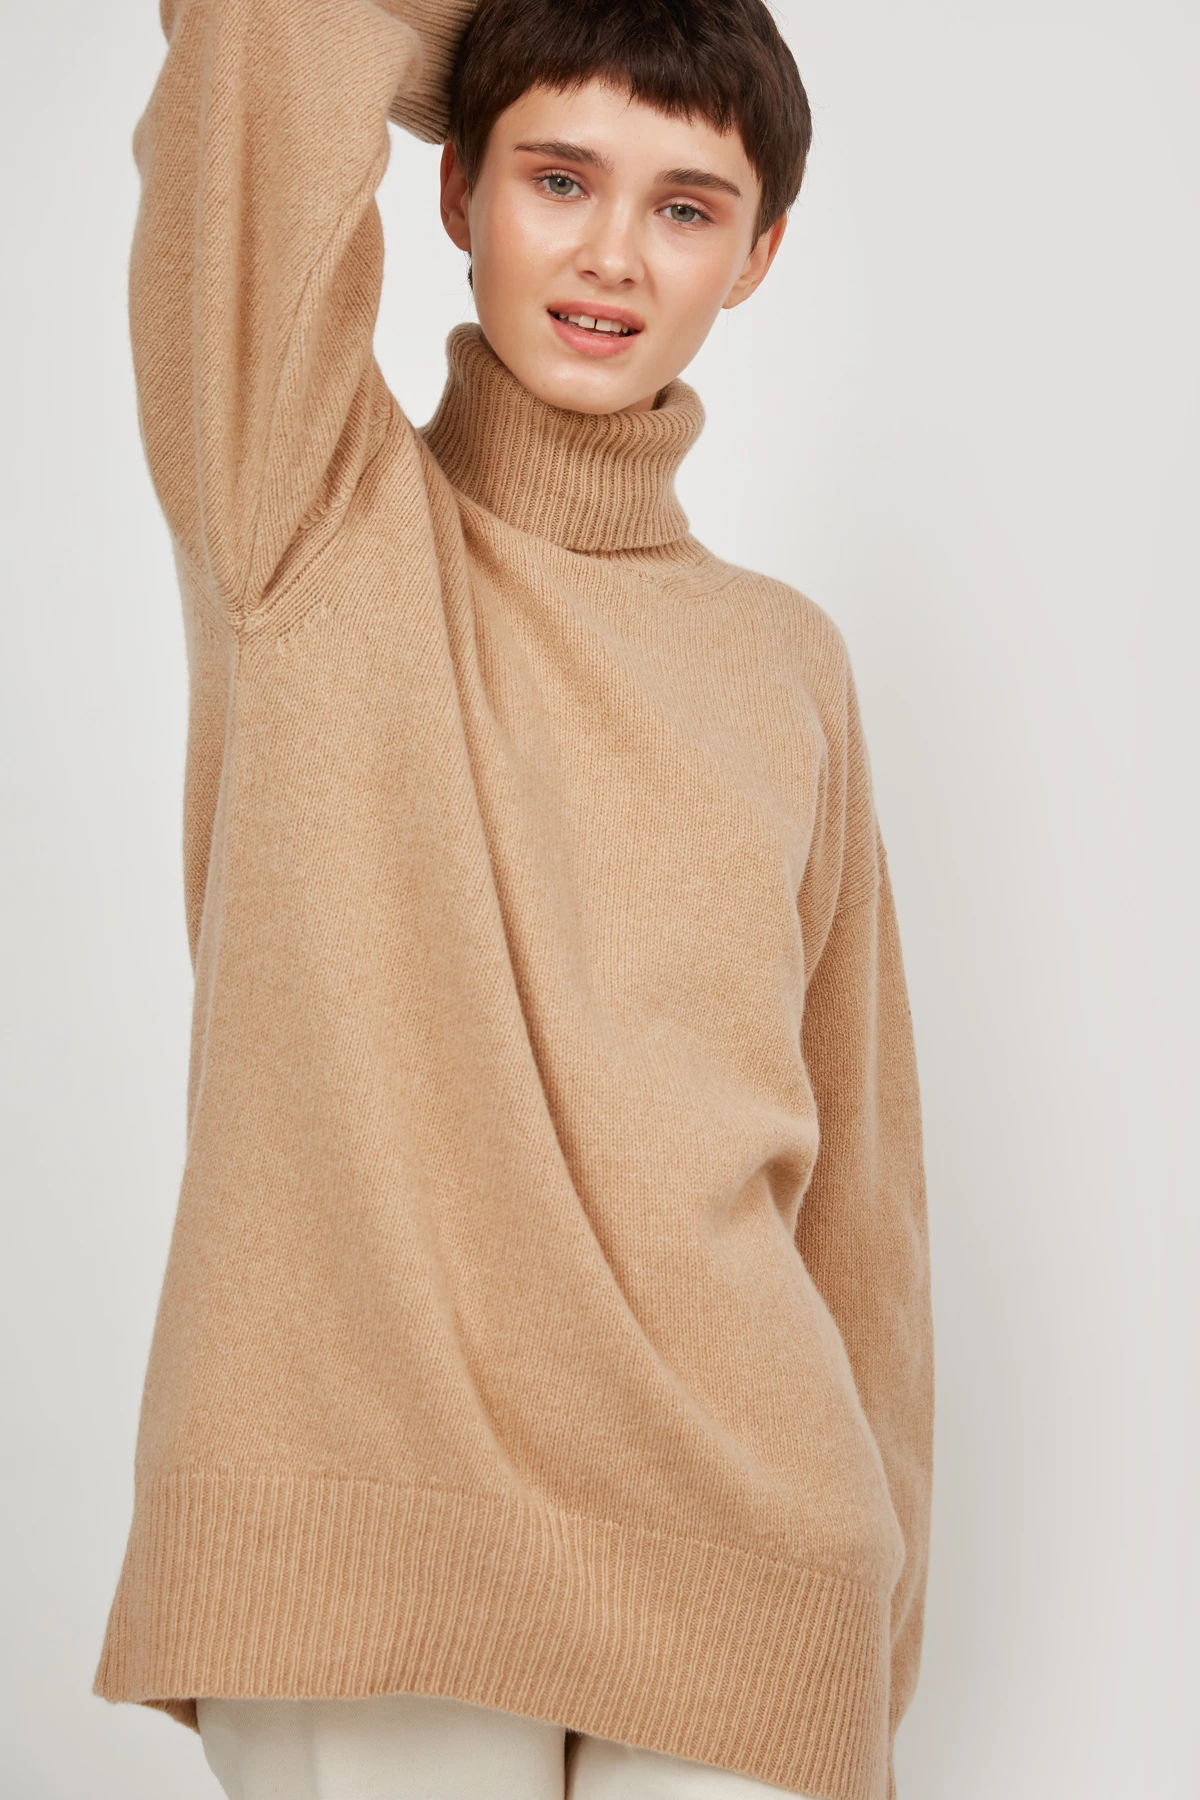 Cashmere beige knitted oversized sweater, photo 4